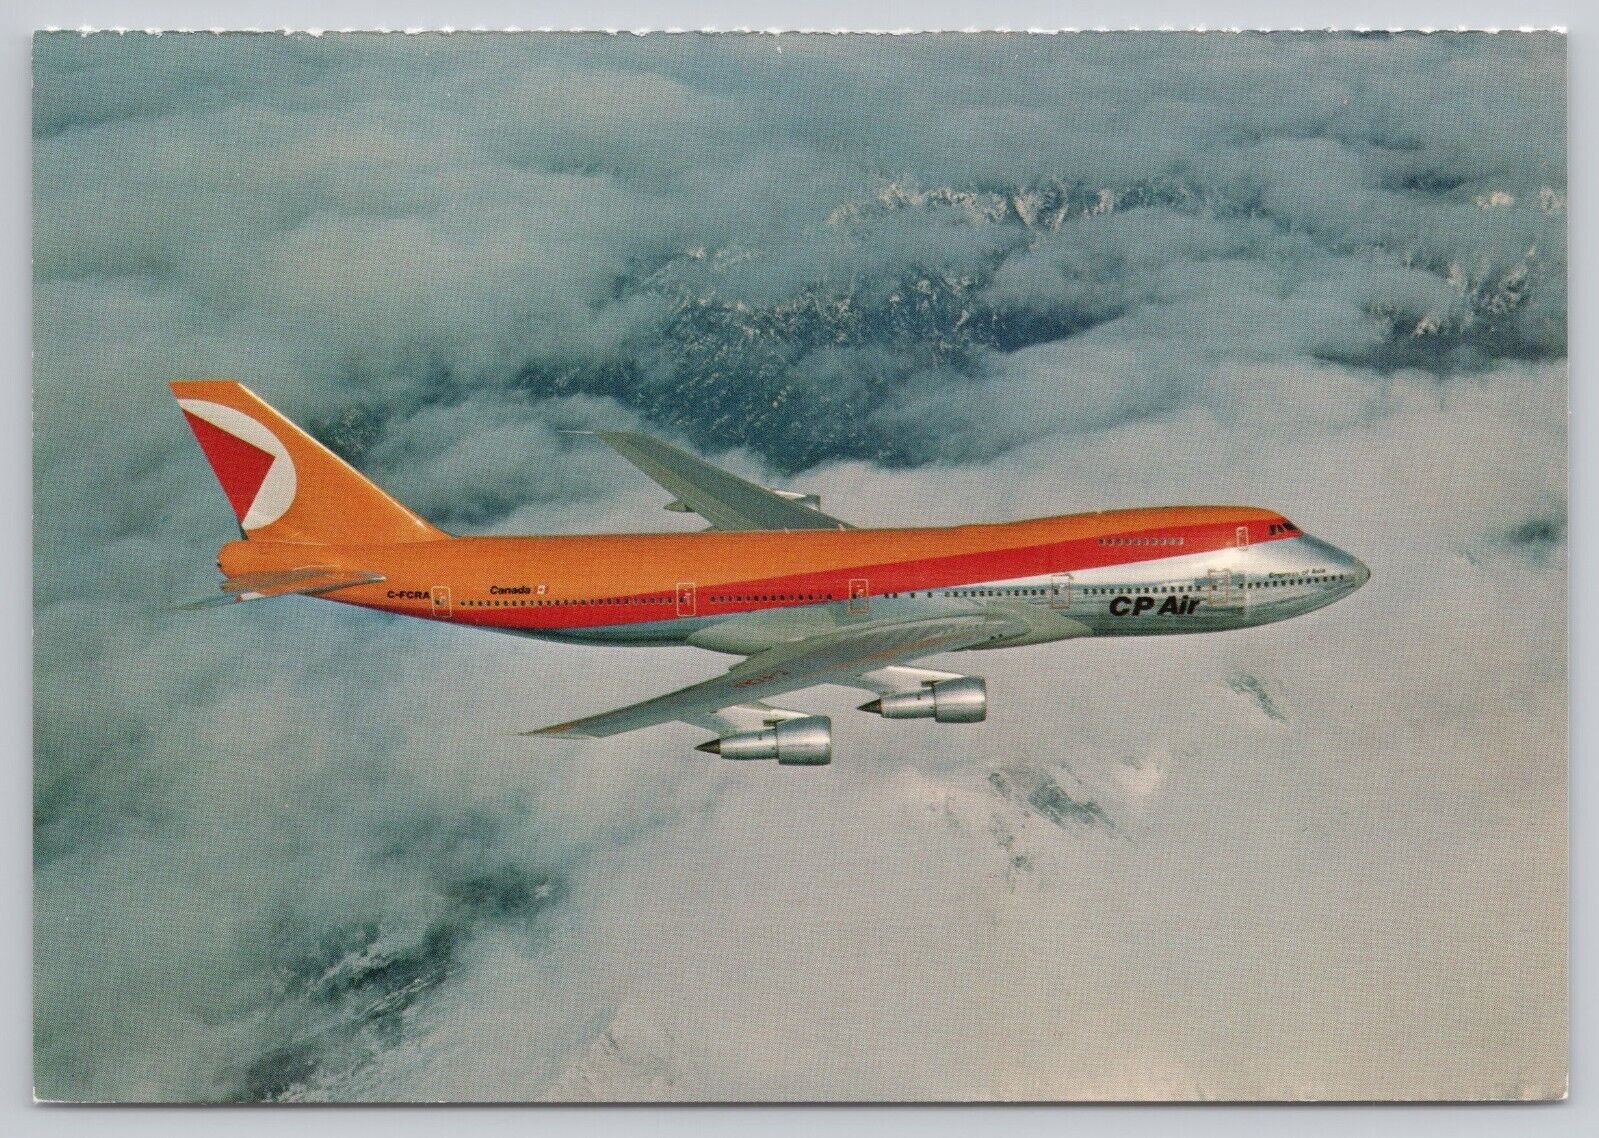 CP Air Boeing 747-200 Jet Aircraft, Flying Comfort at its Best, Vintage Postcard